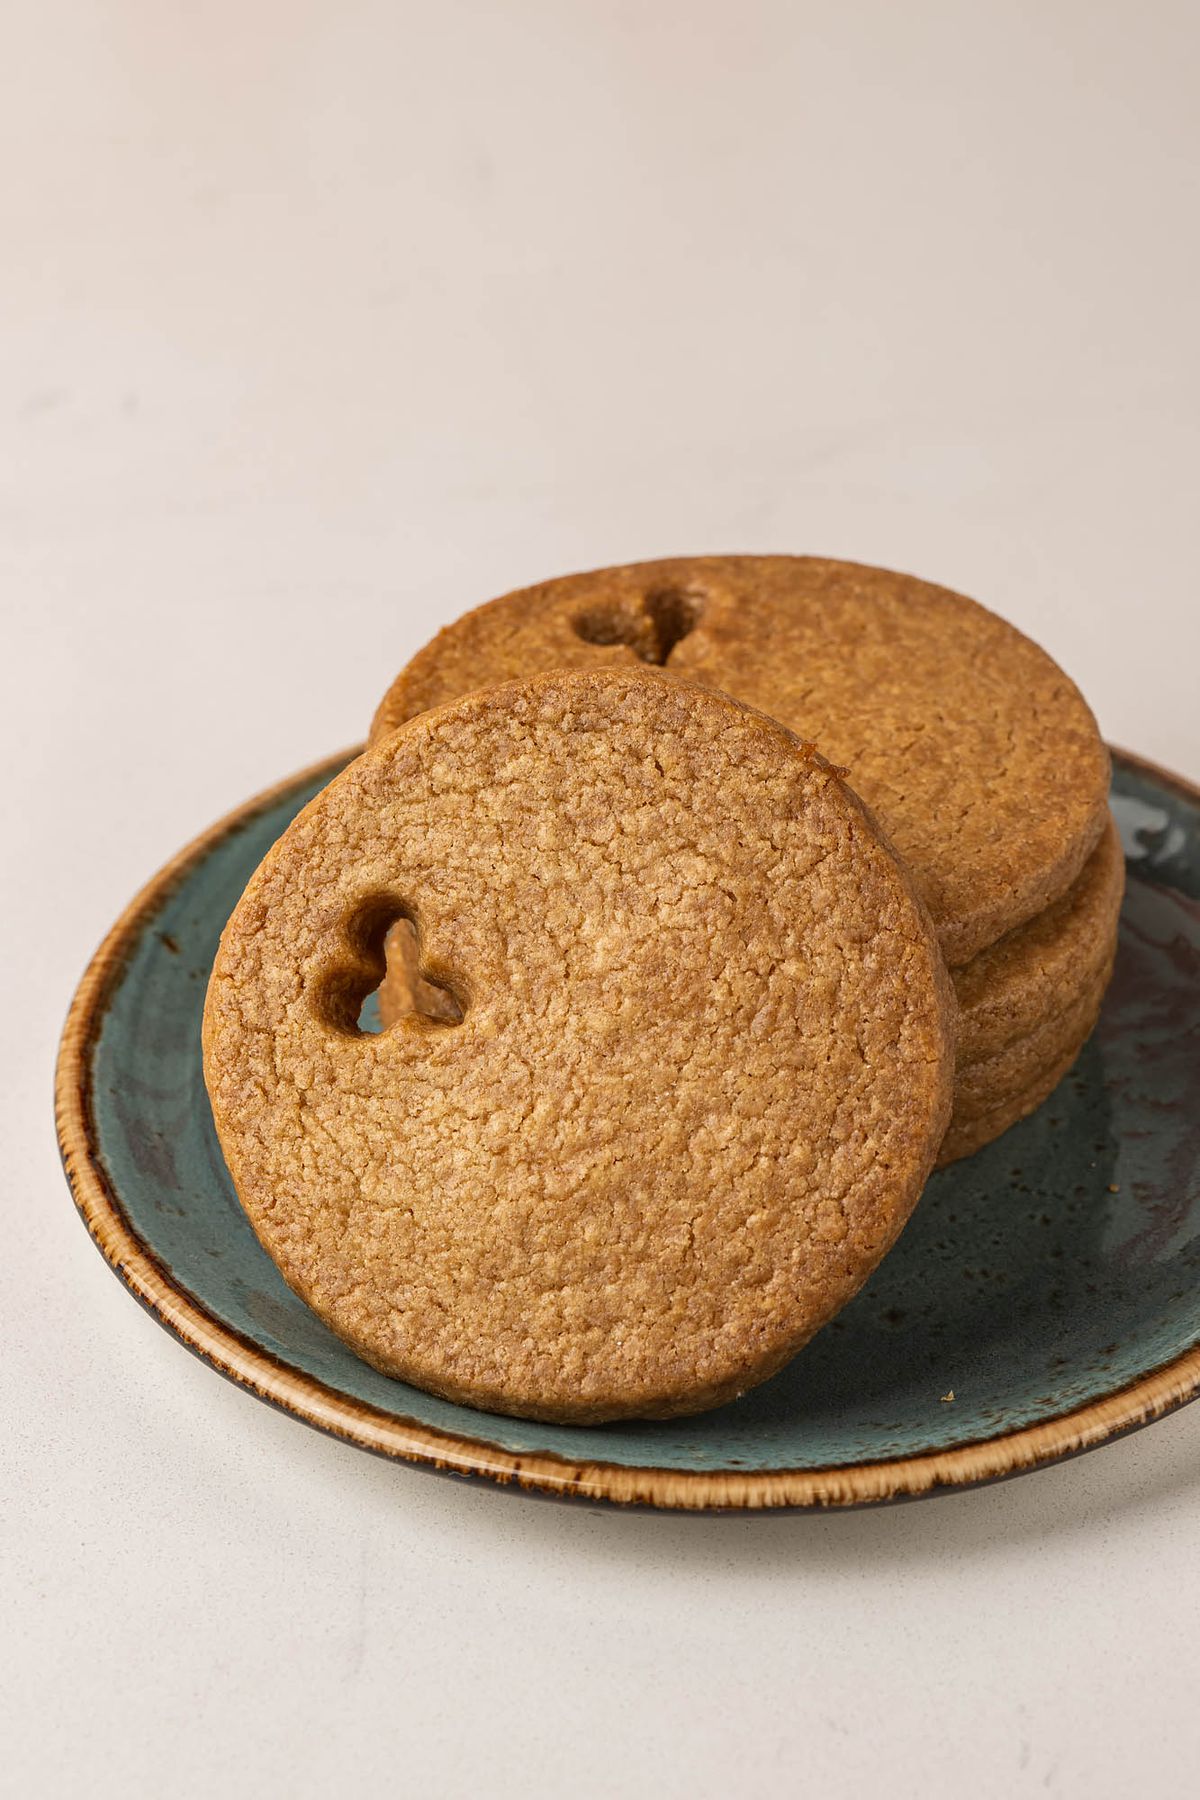 Circular dark brown cookies with small holes cut out on a green ceramic plate at an LA bakery.